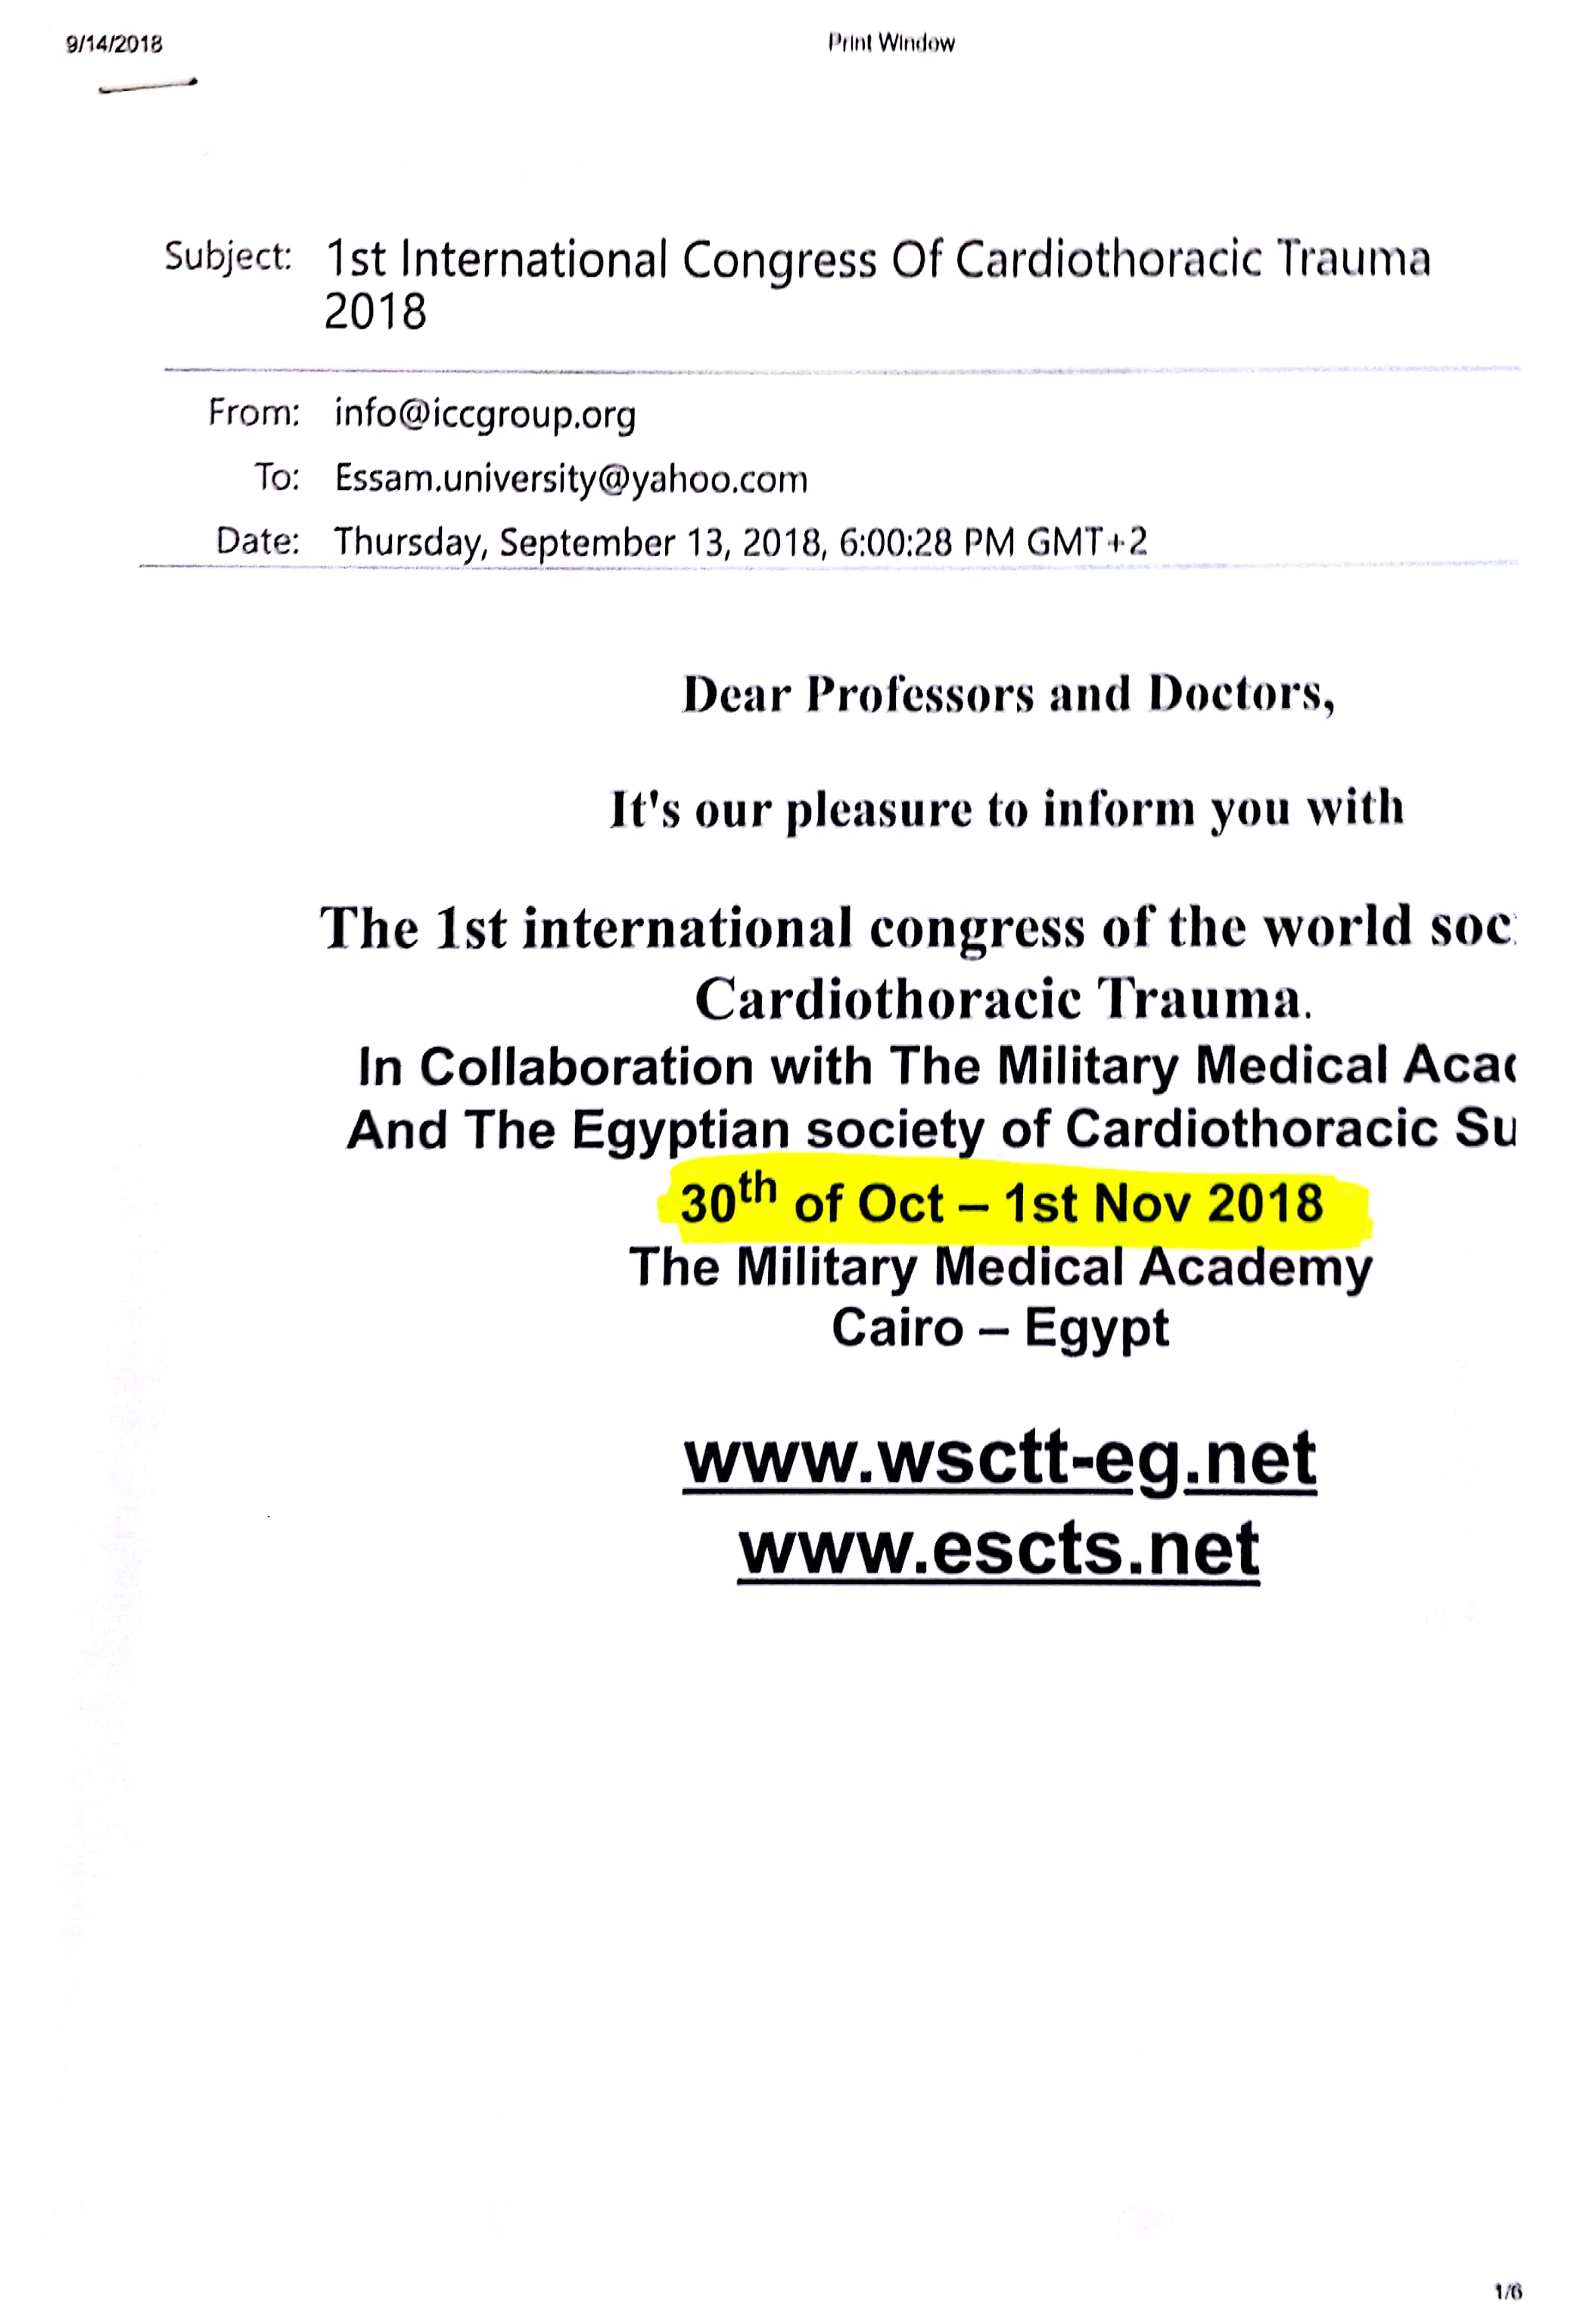 The first international conference of the world society of Cardiothoracic trauma